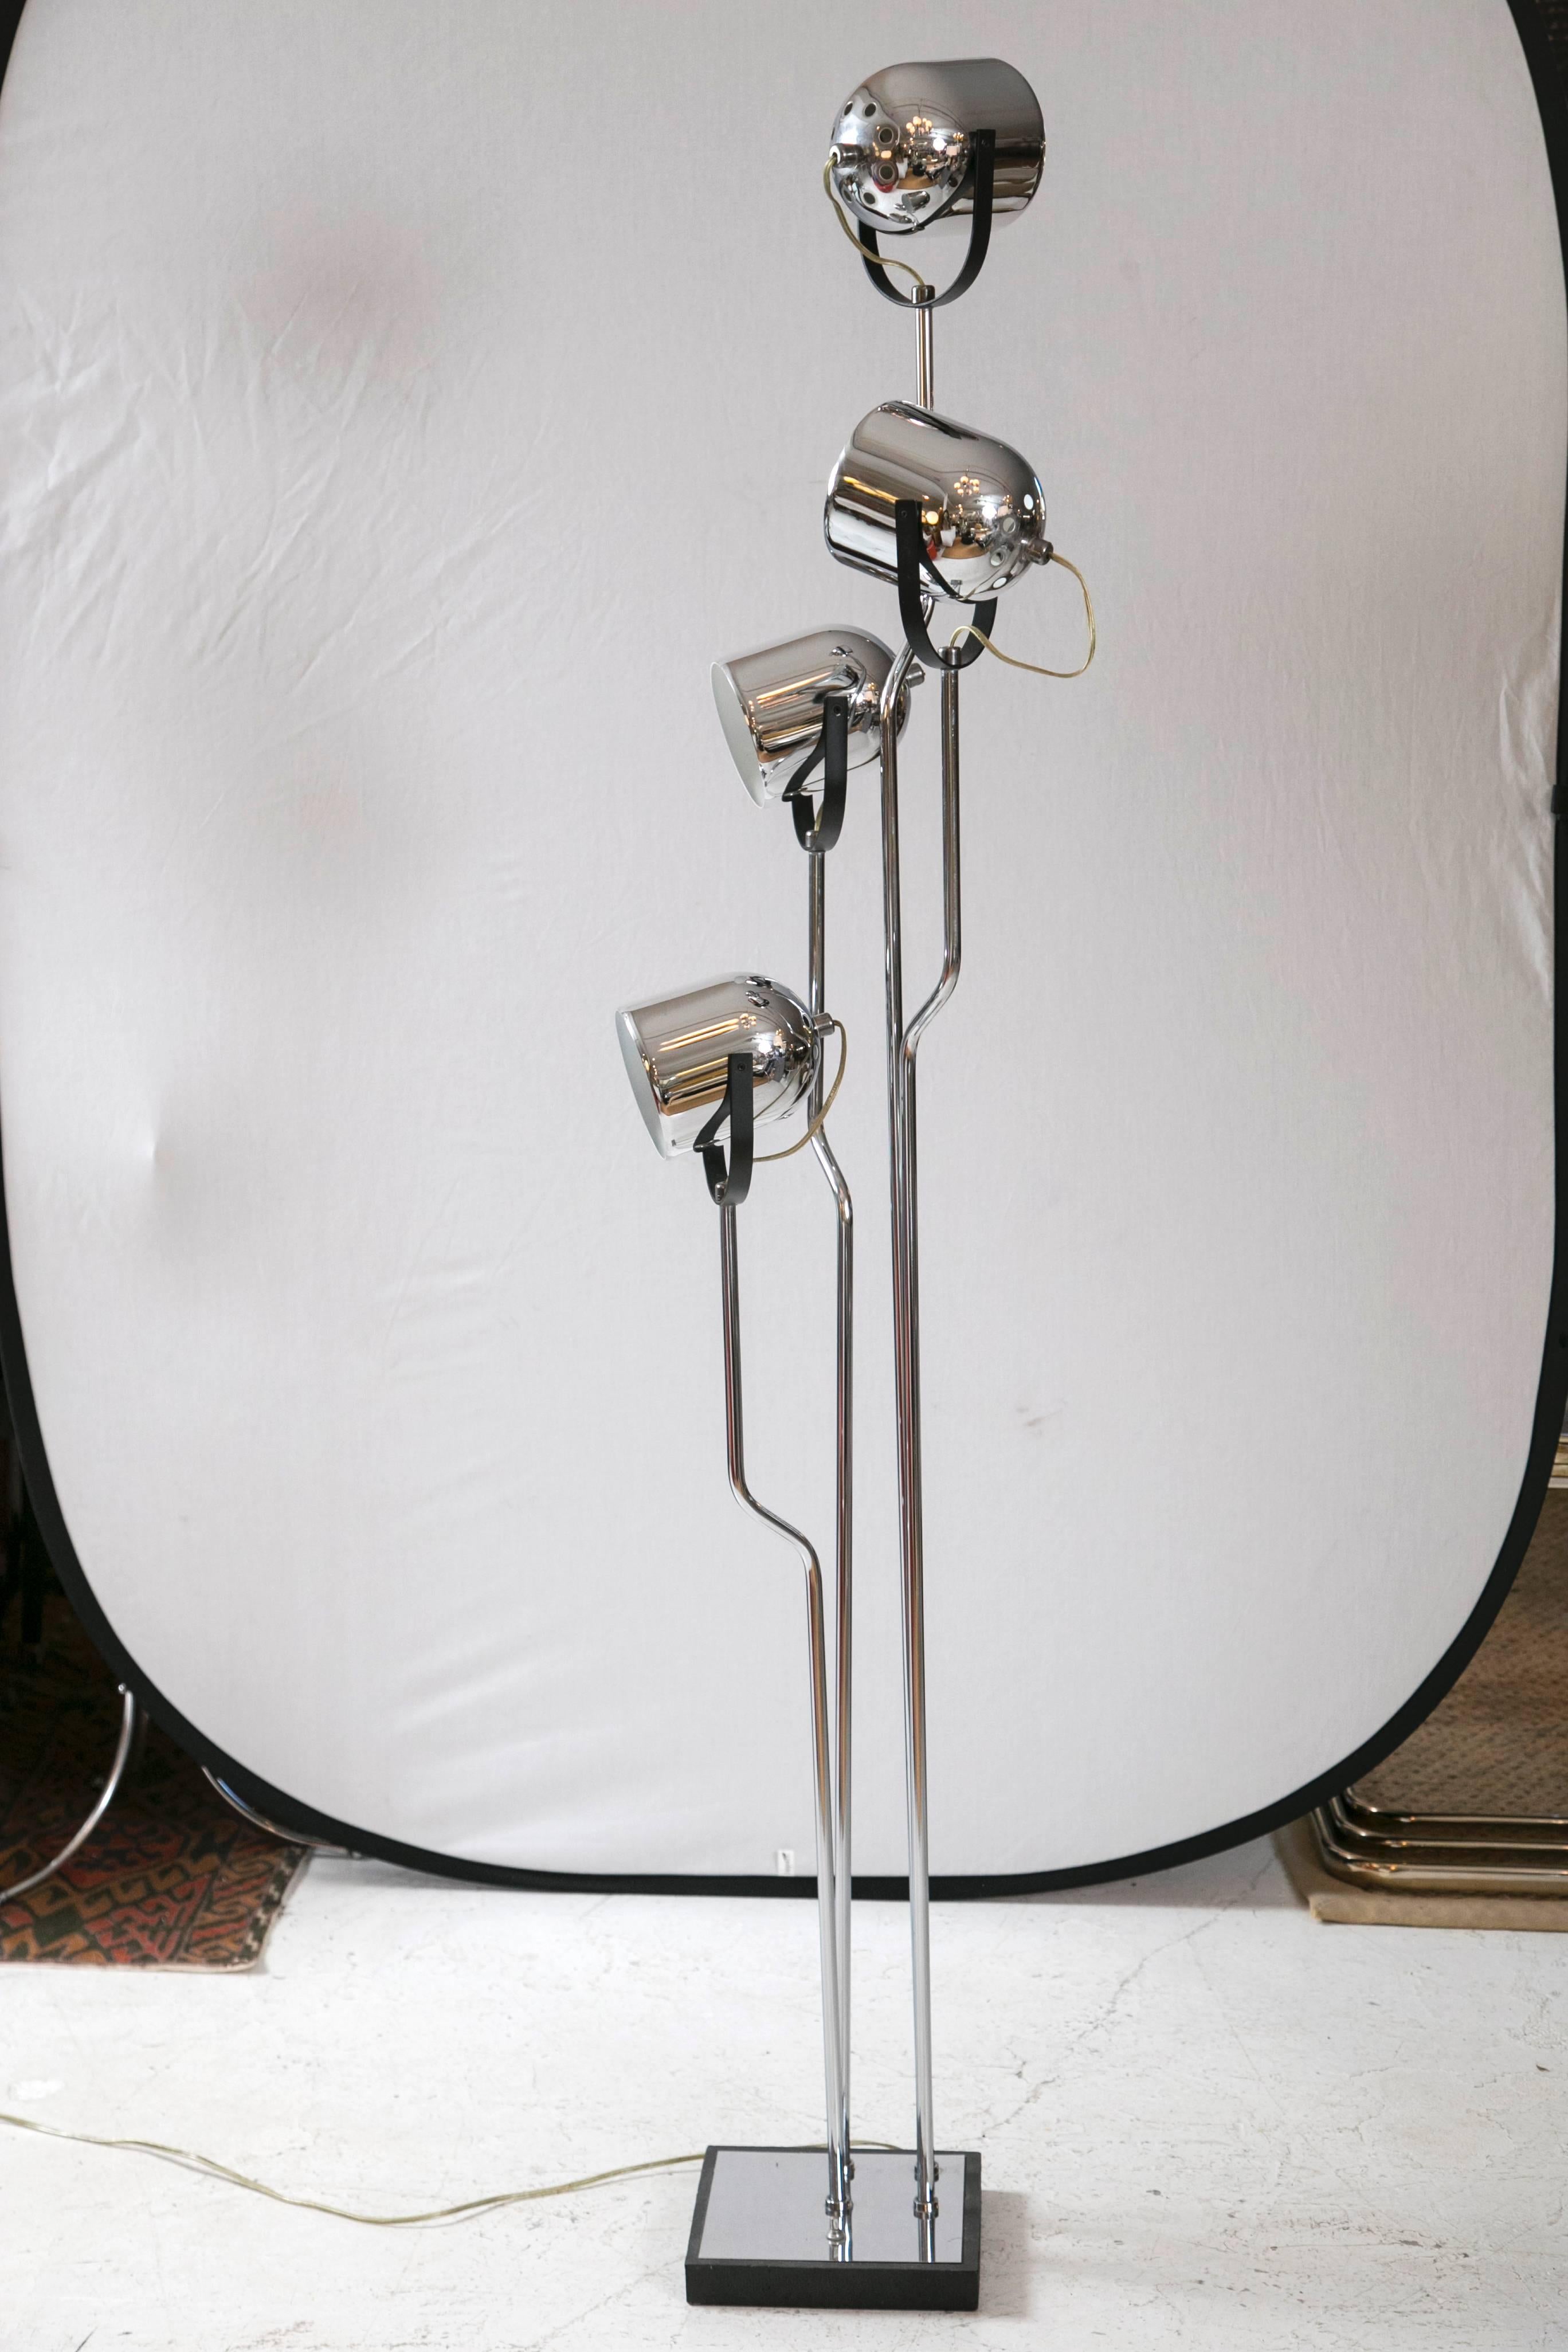 Classic Italian. Chic four-head completely rotatable floor lamp by Reggiani. Each rod rotates and each head adjusts up and down. Black metal accents throughout the piece accentuate the crispness of the chrome. Stunning piece. 60 watts recommended